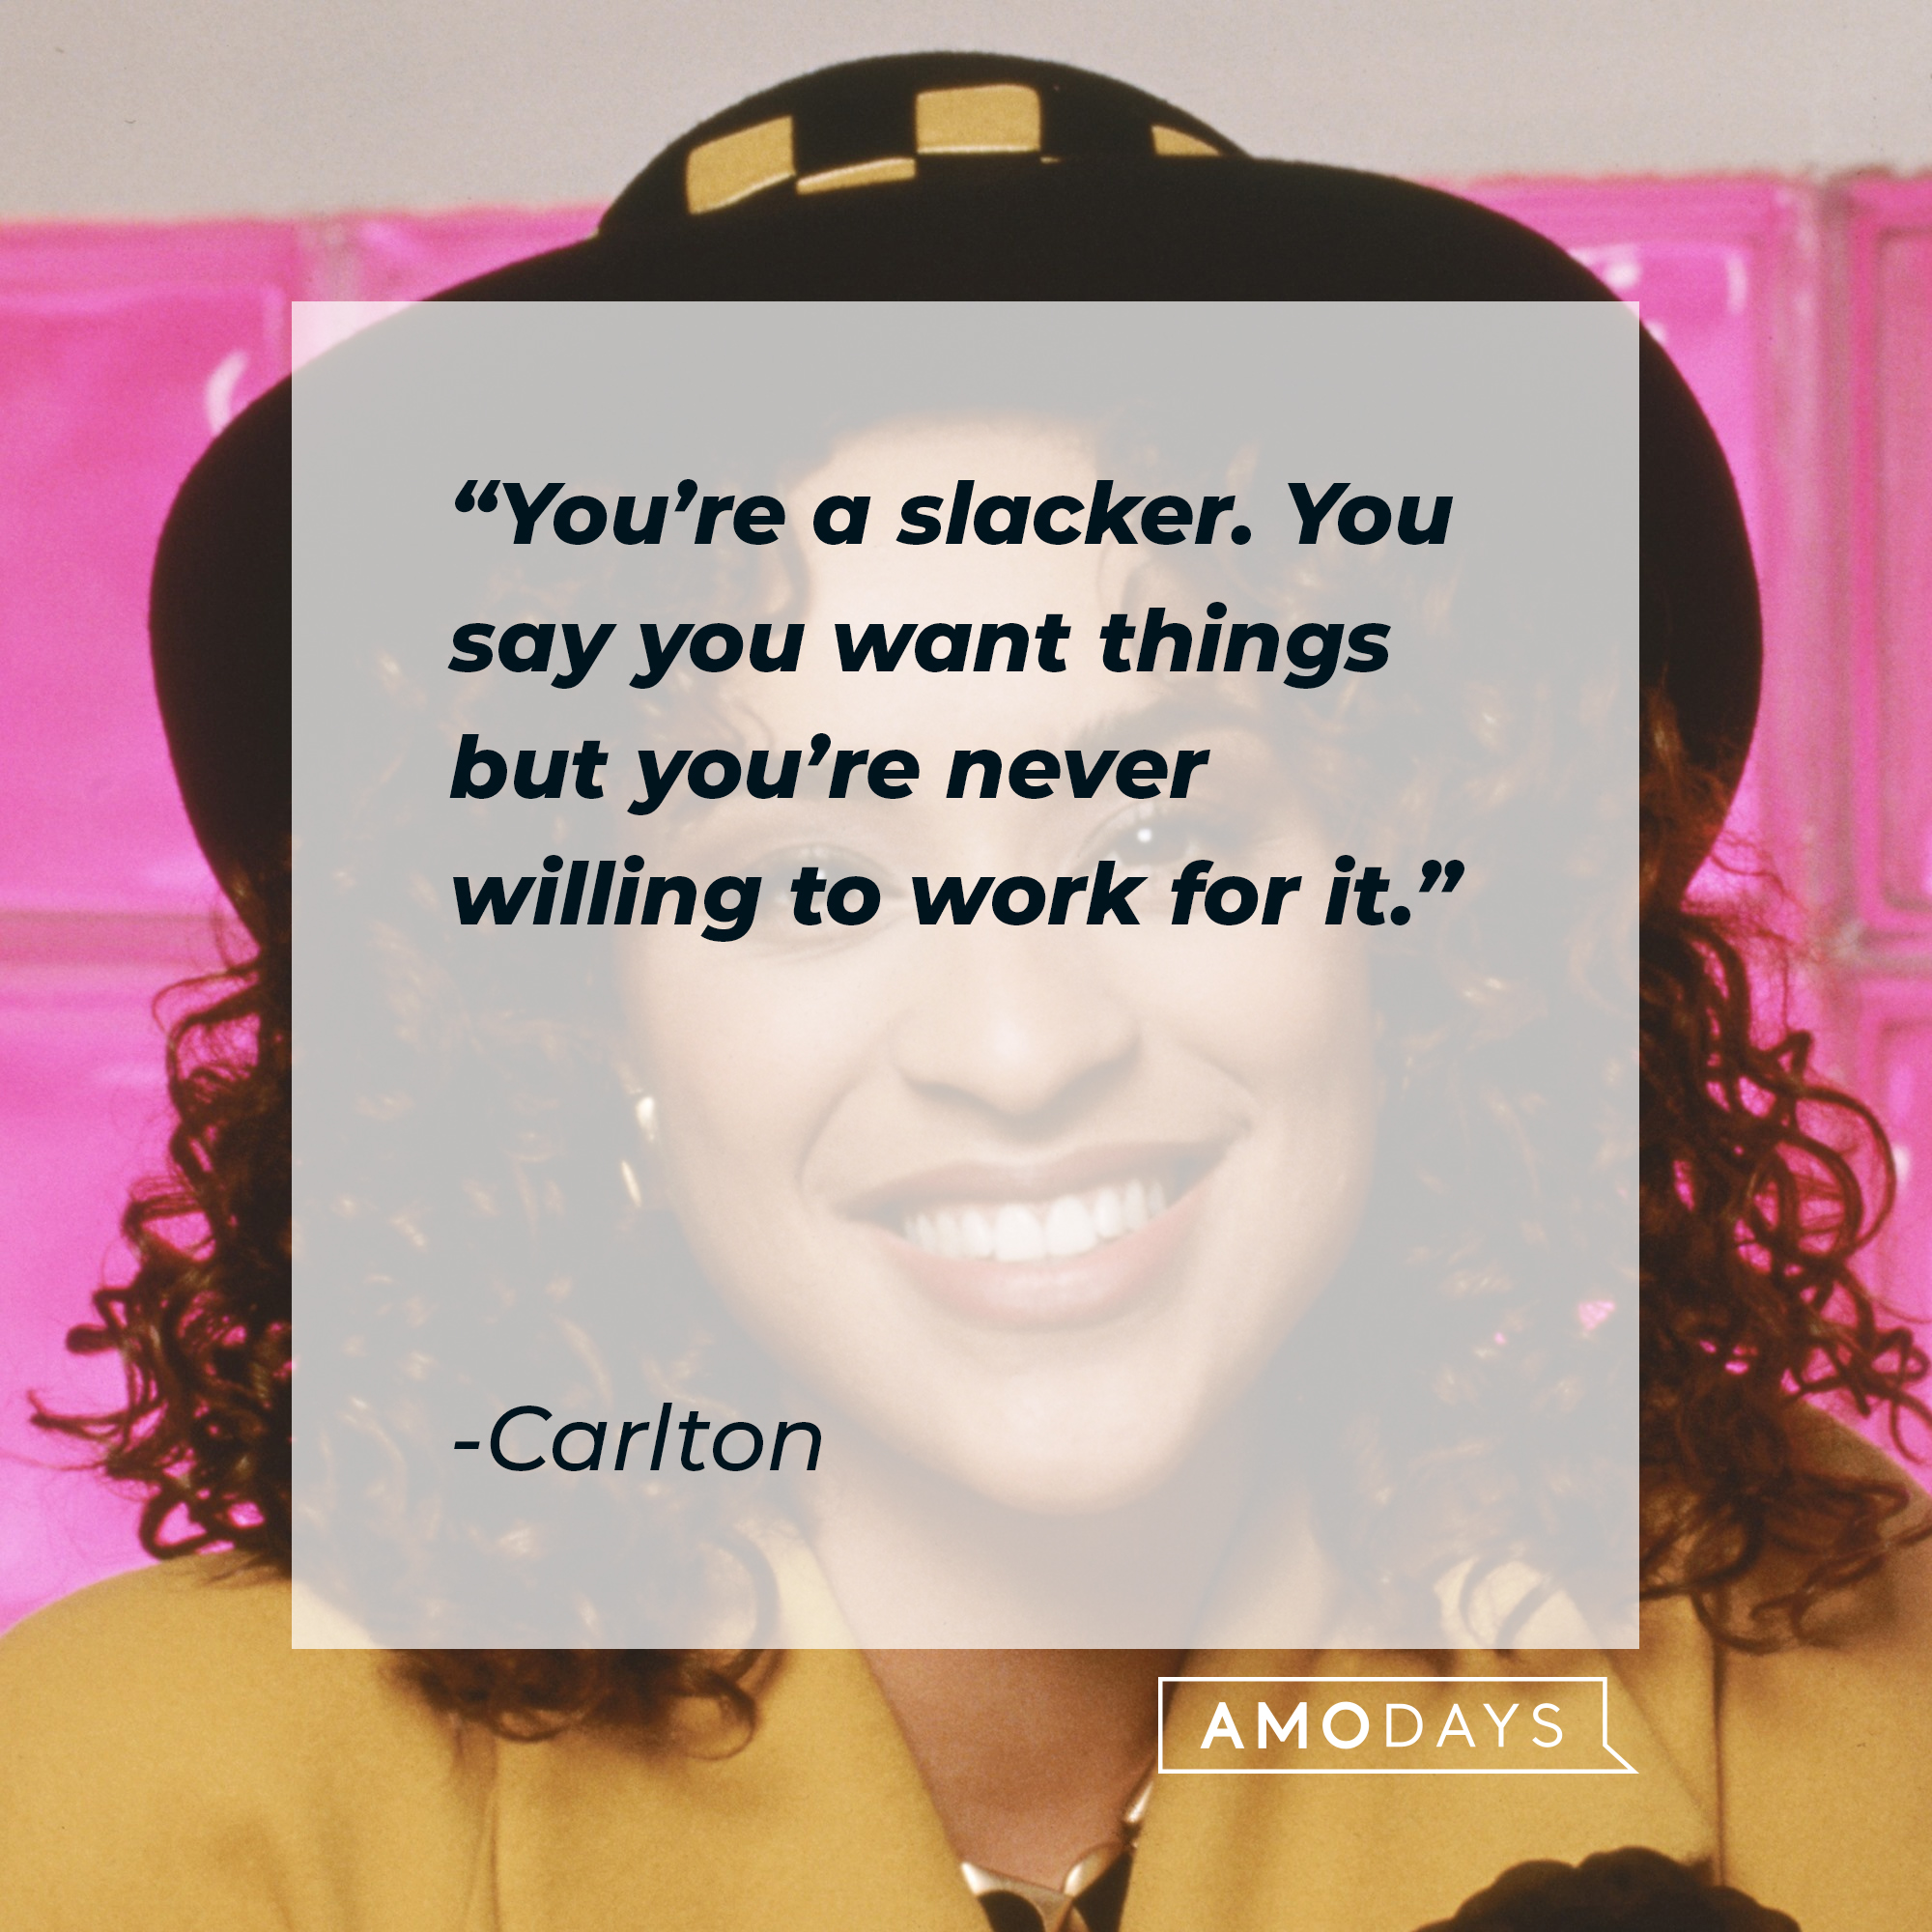 A picture of Vivian with Carlton’s quote: "You’re a slacker. You say you want things but you’re never willing to work for it.” | Source: facebook.com/TheFreshPrinceofBelAir